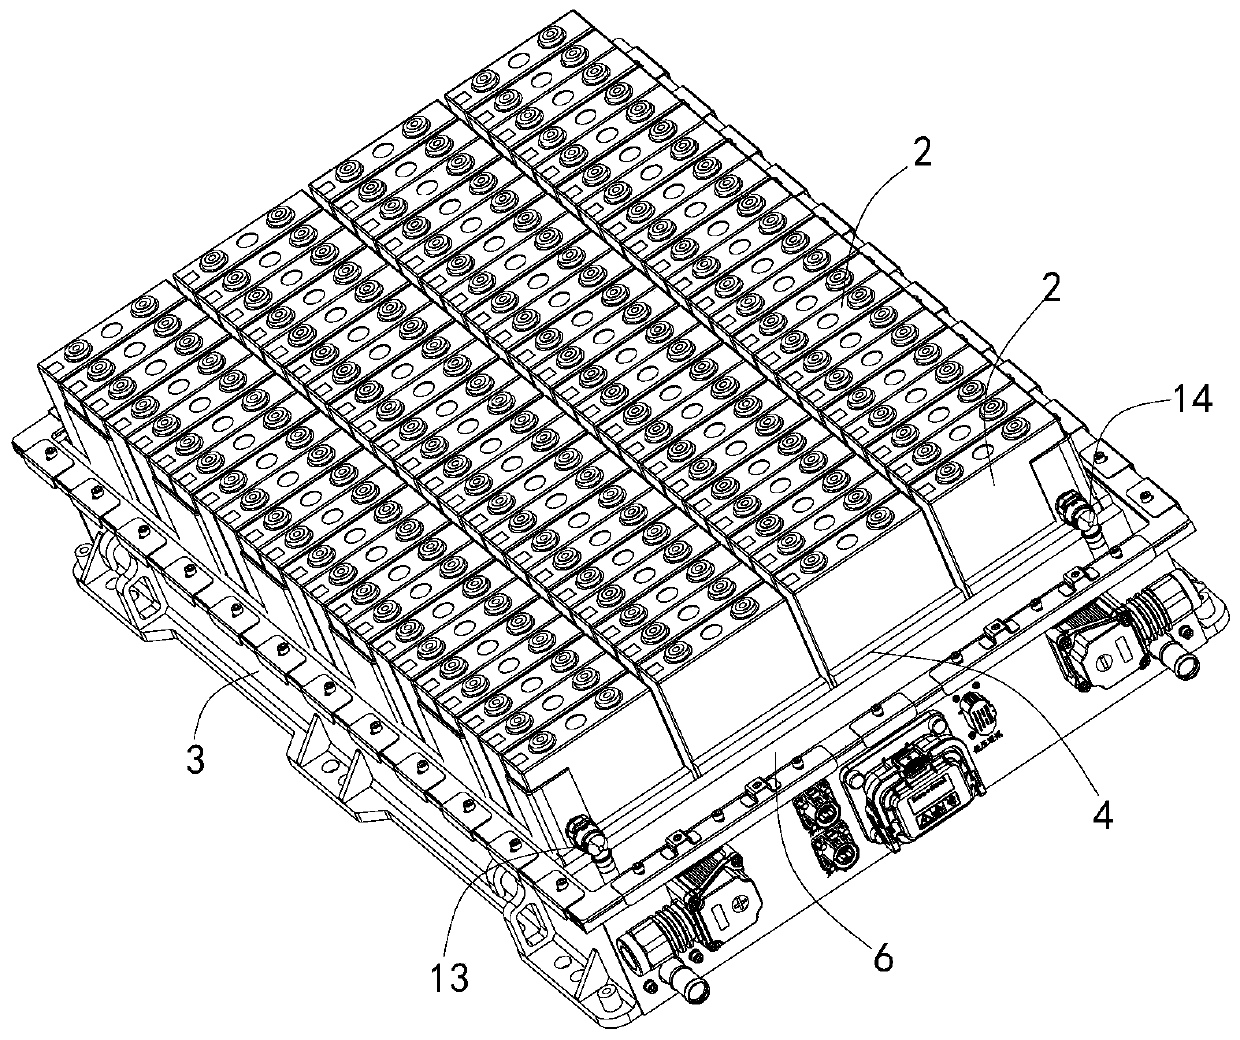 Winding type liquid cooling pipeline and cell-to-pack battery pack